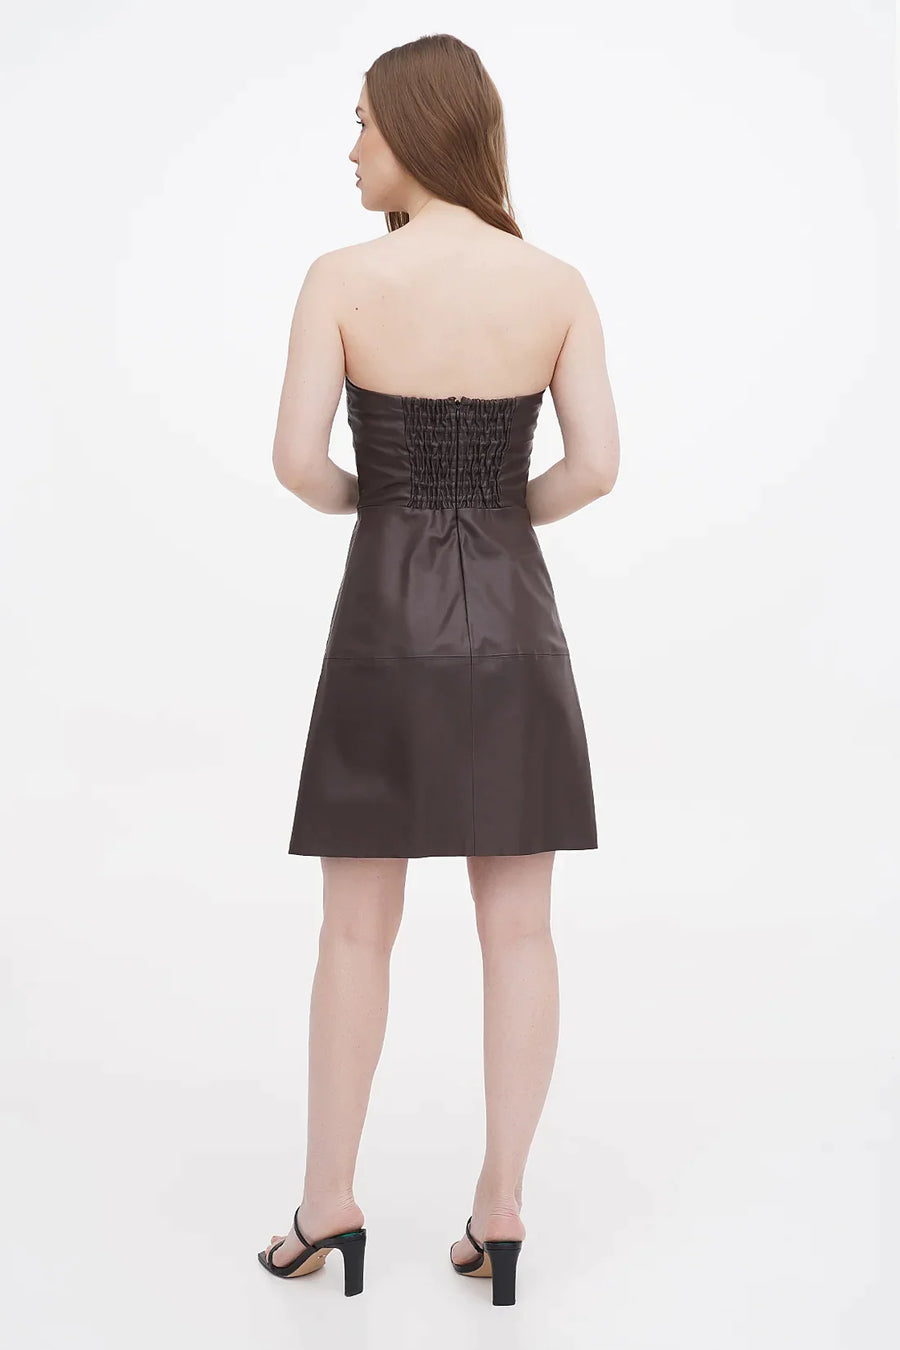 A Model Wearing Brown Organic Cotton Organic vegan leather strapless dress, curated by Only Ethikal